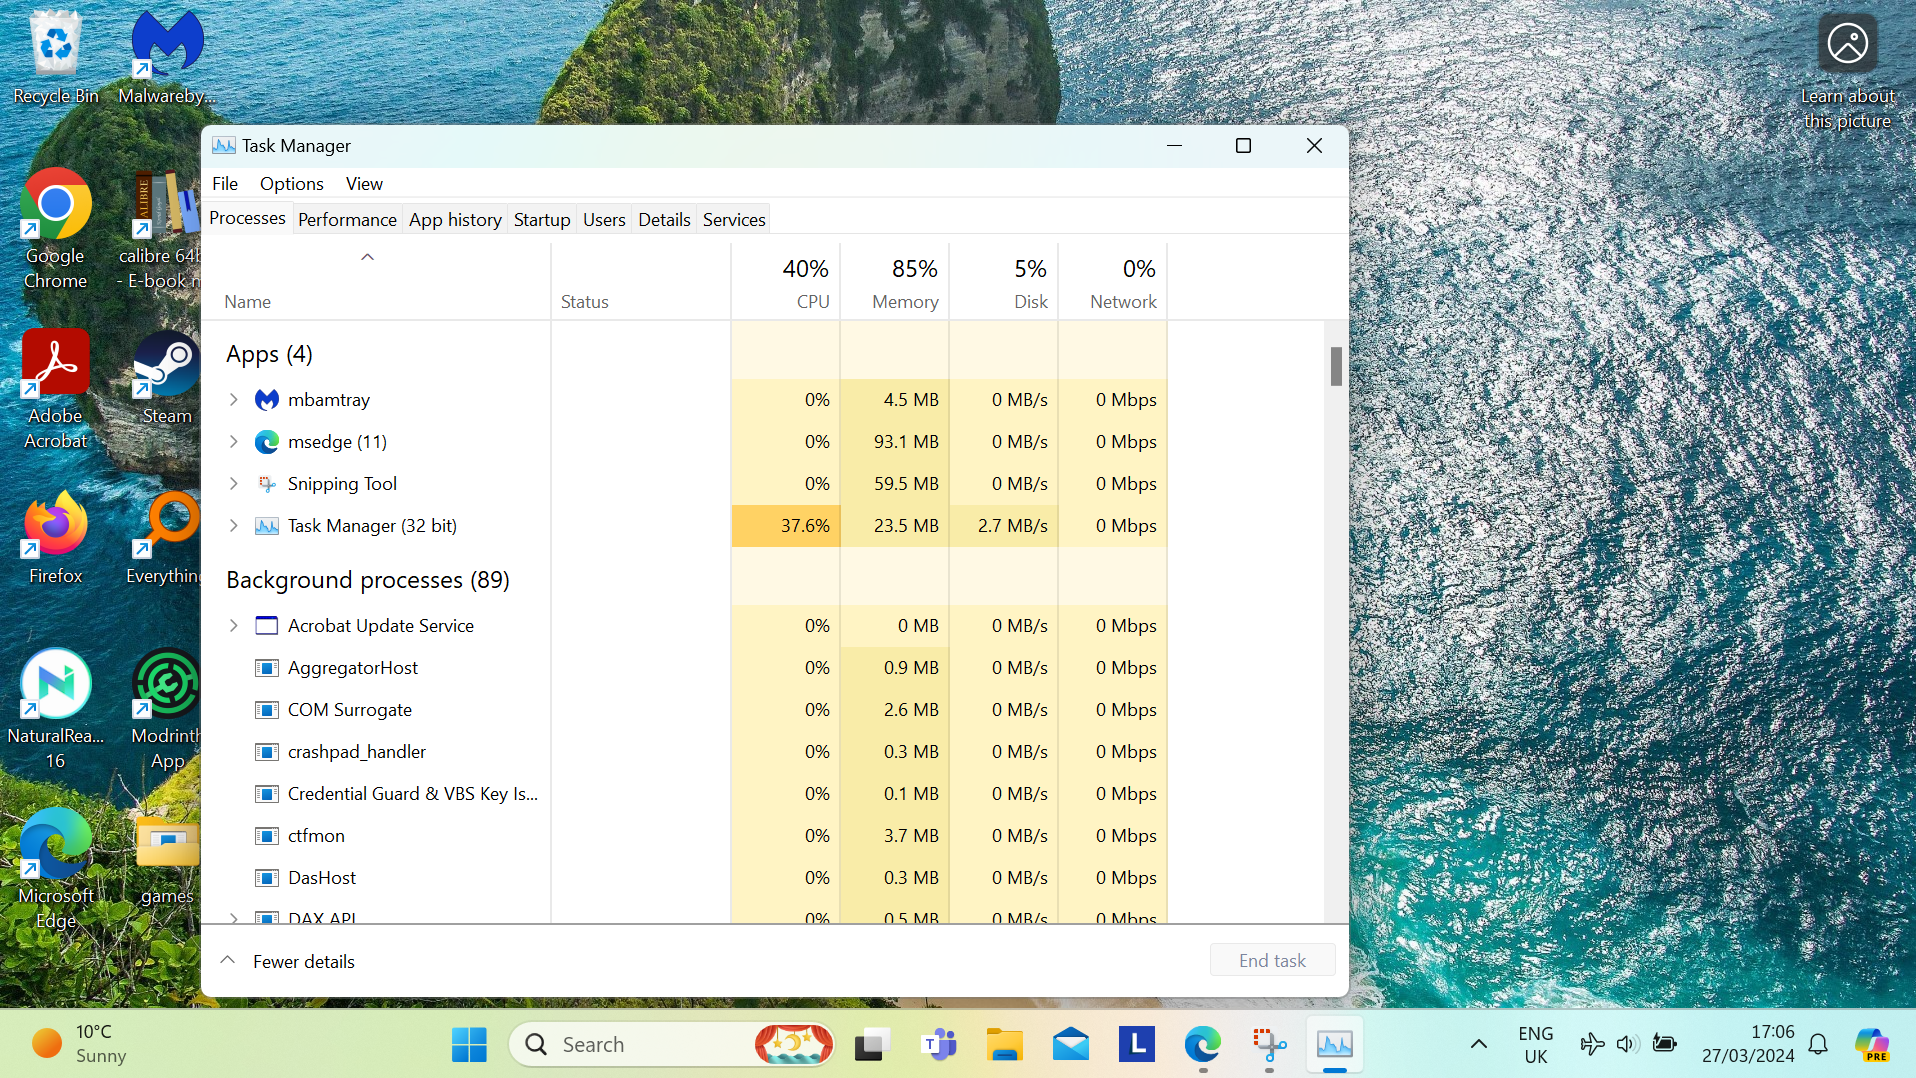 A screenshot featuring the older design of Task Manager